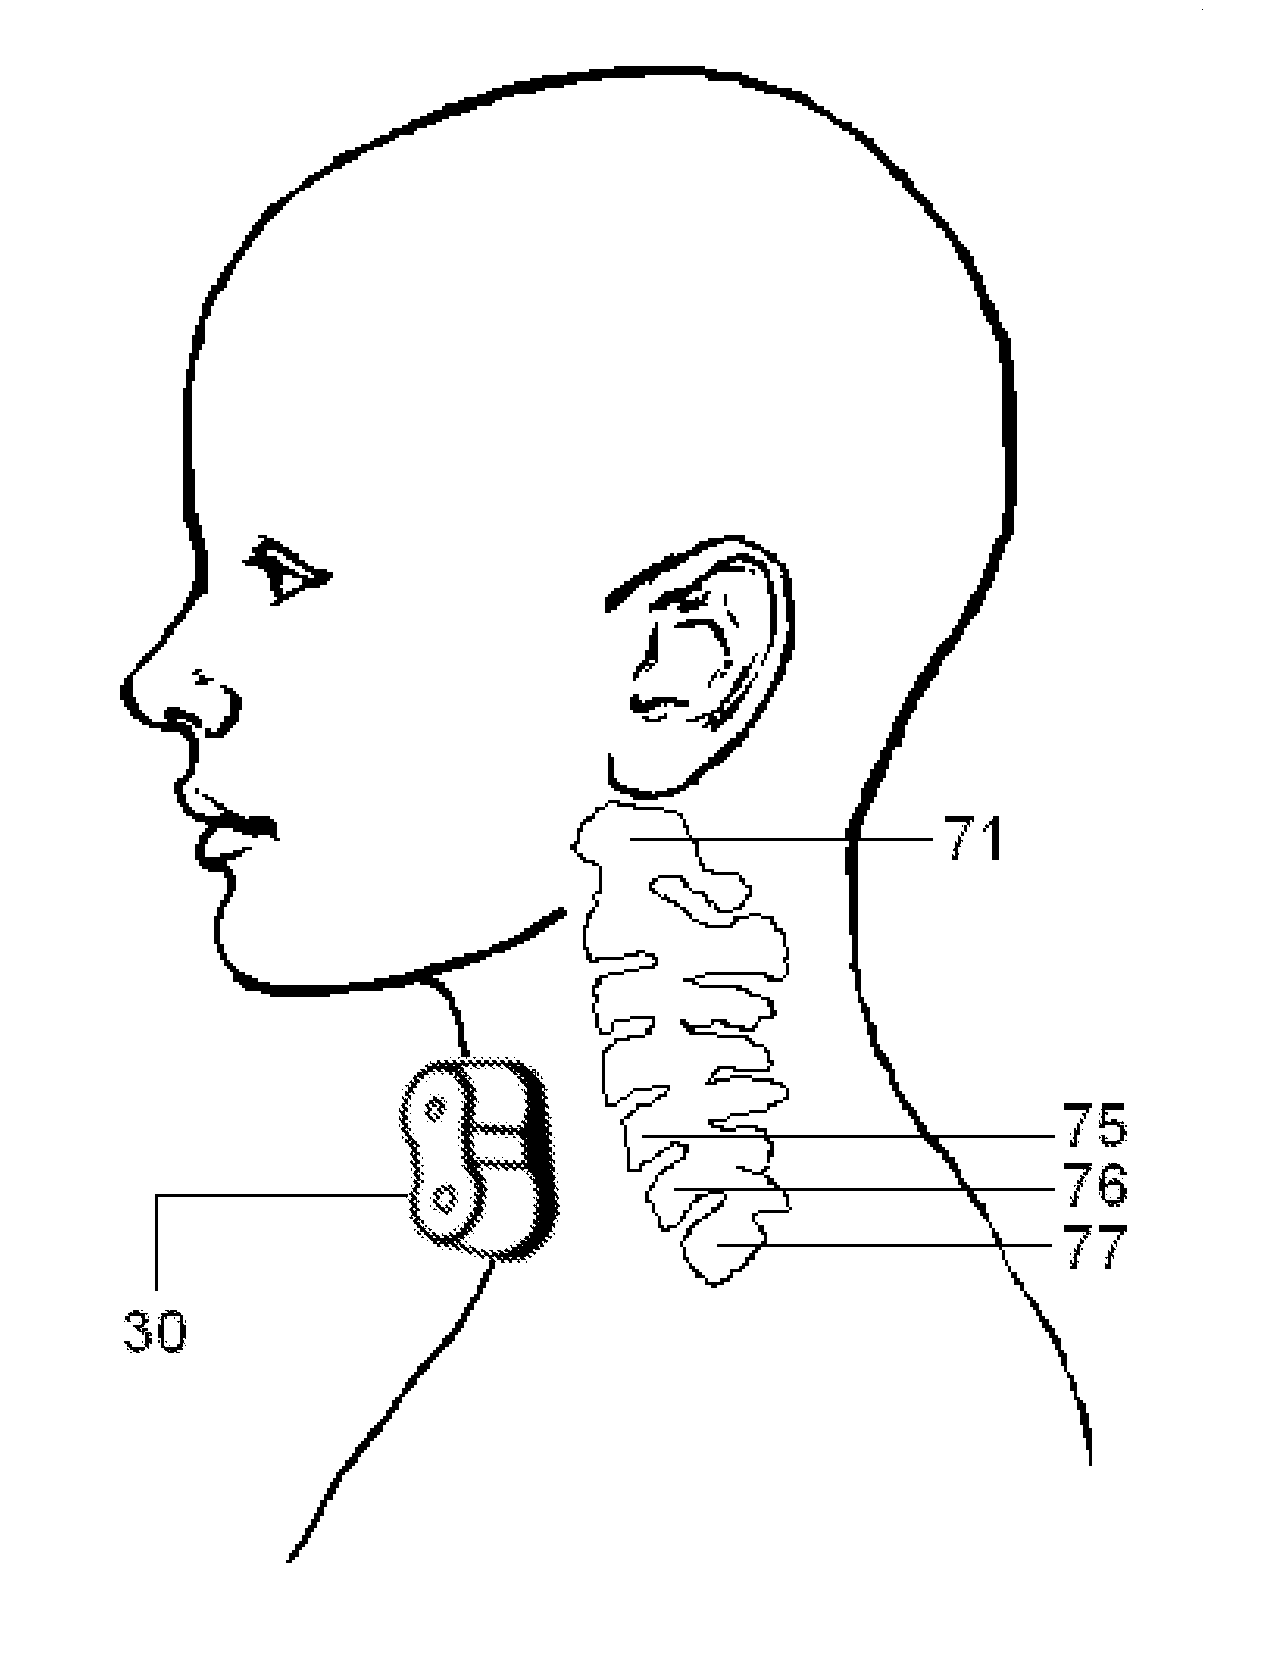 Non-invasive methods and devices for inducing euphoria in a patient and their therapeutic application